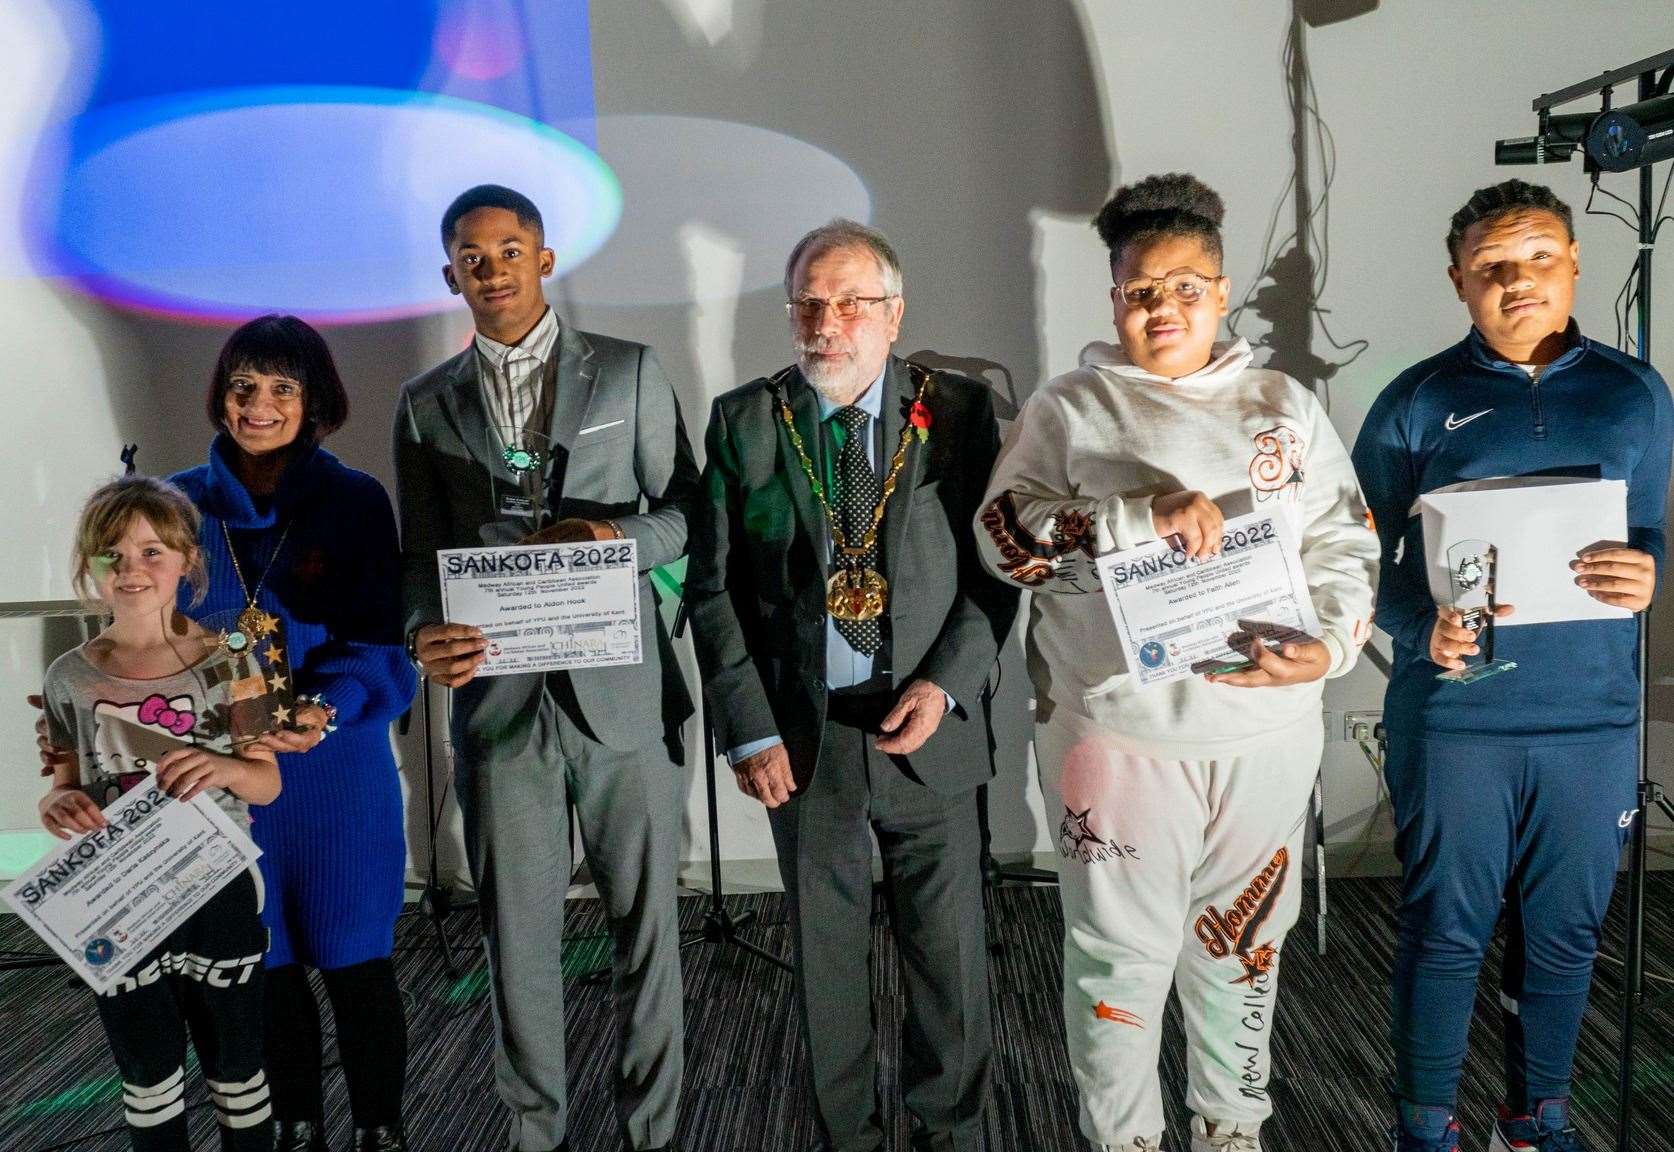 The organisation hosts annual awards which honour unsung heroes and young people